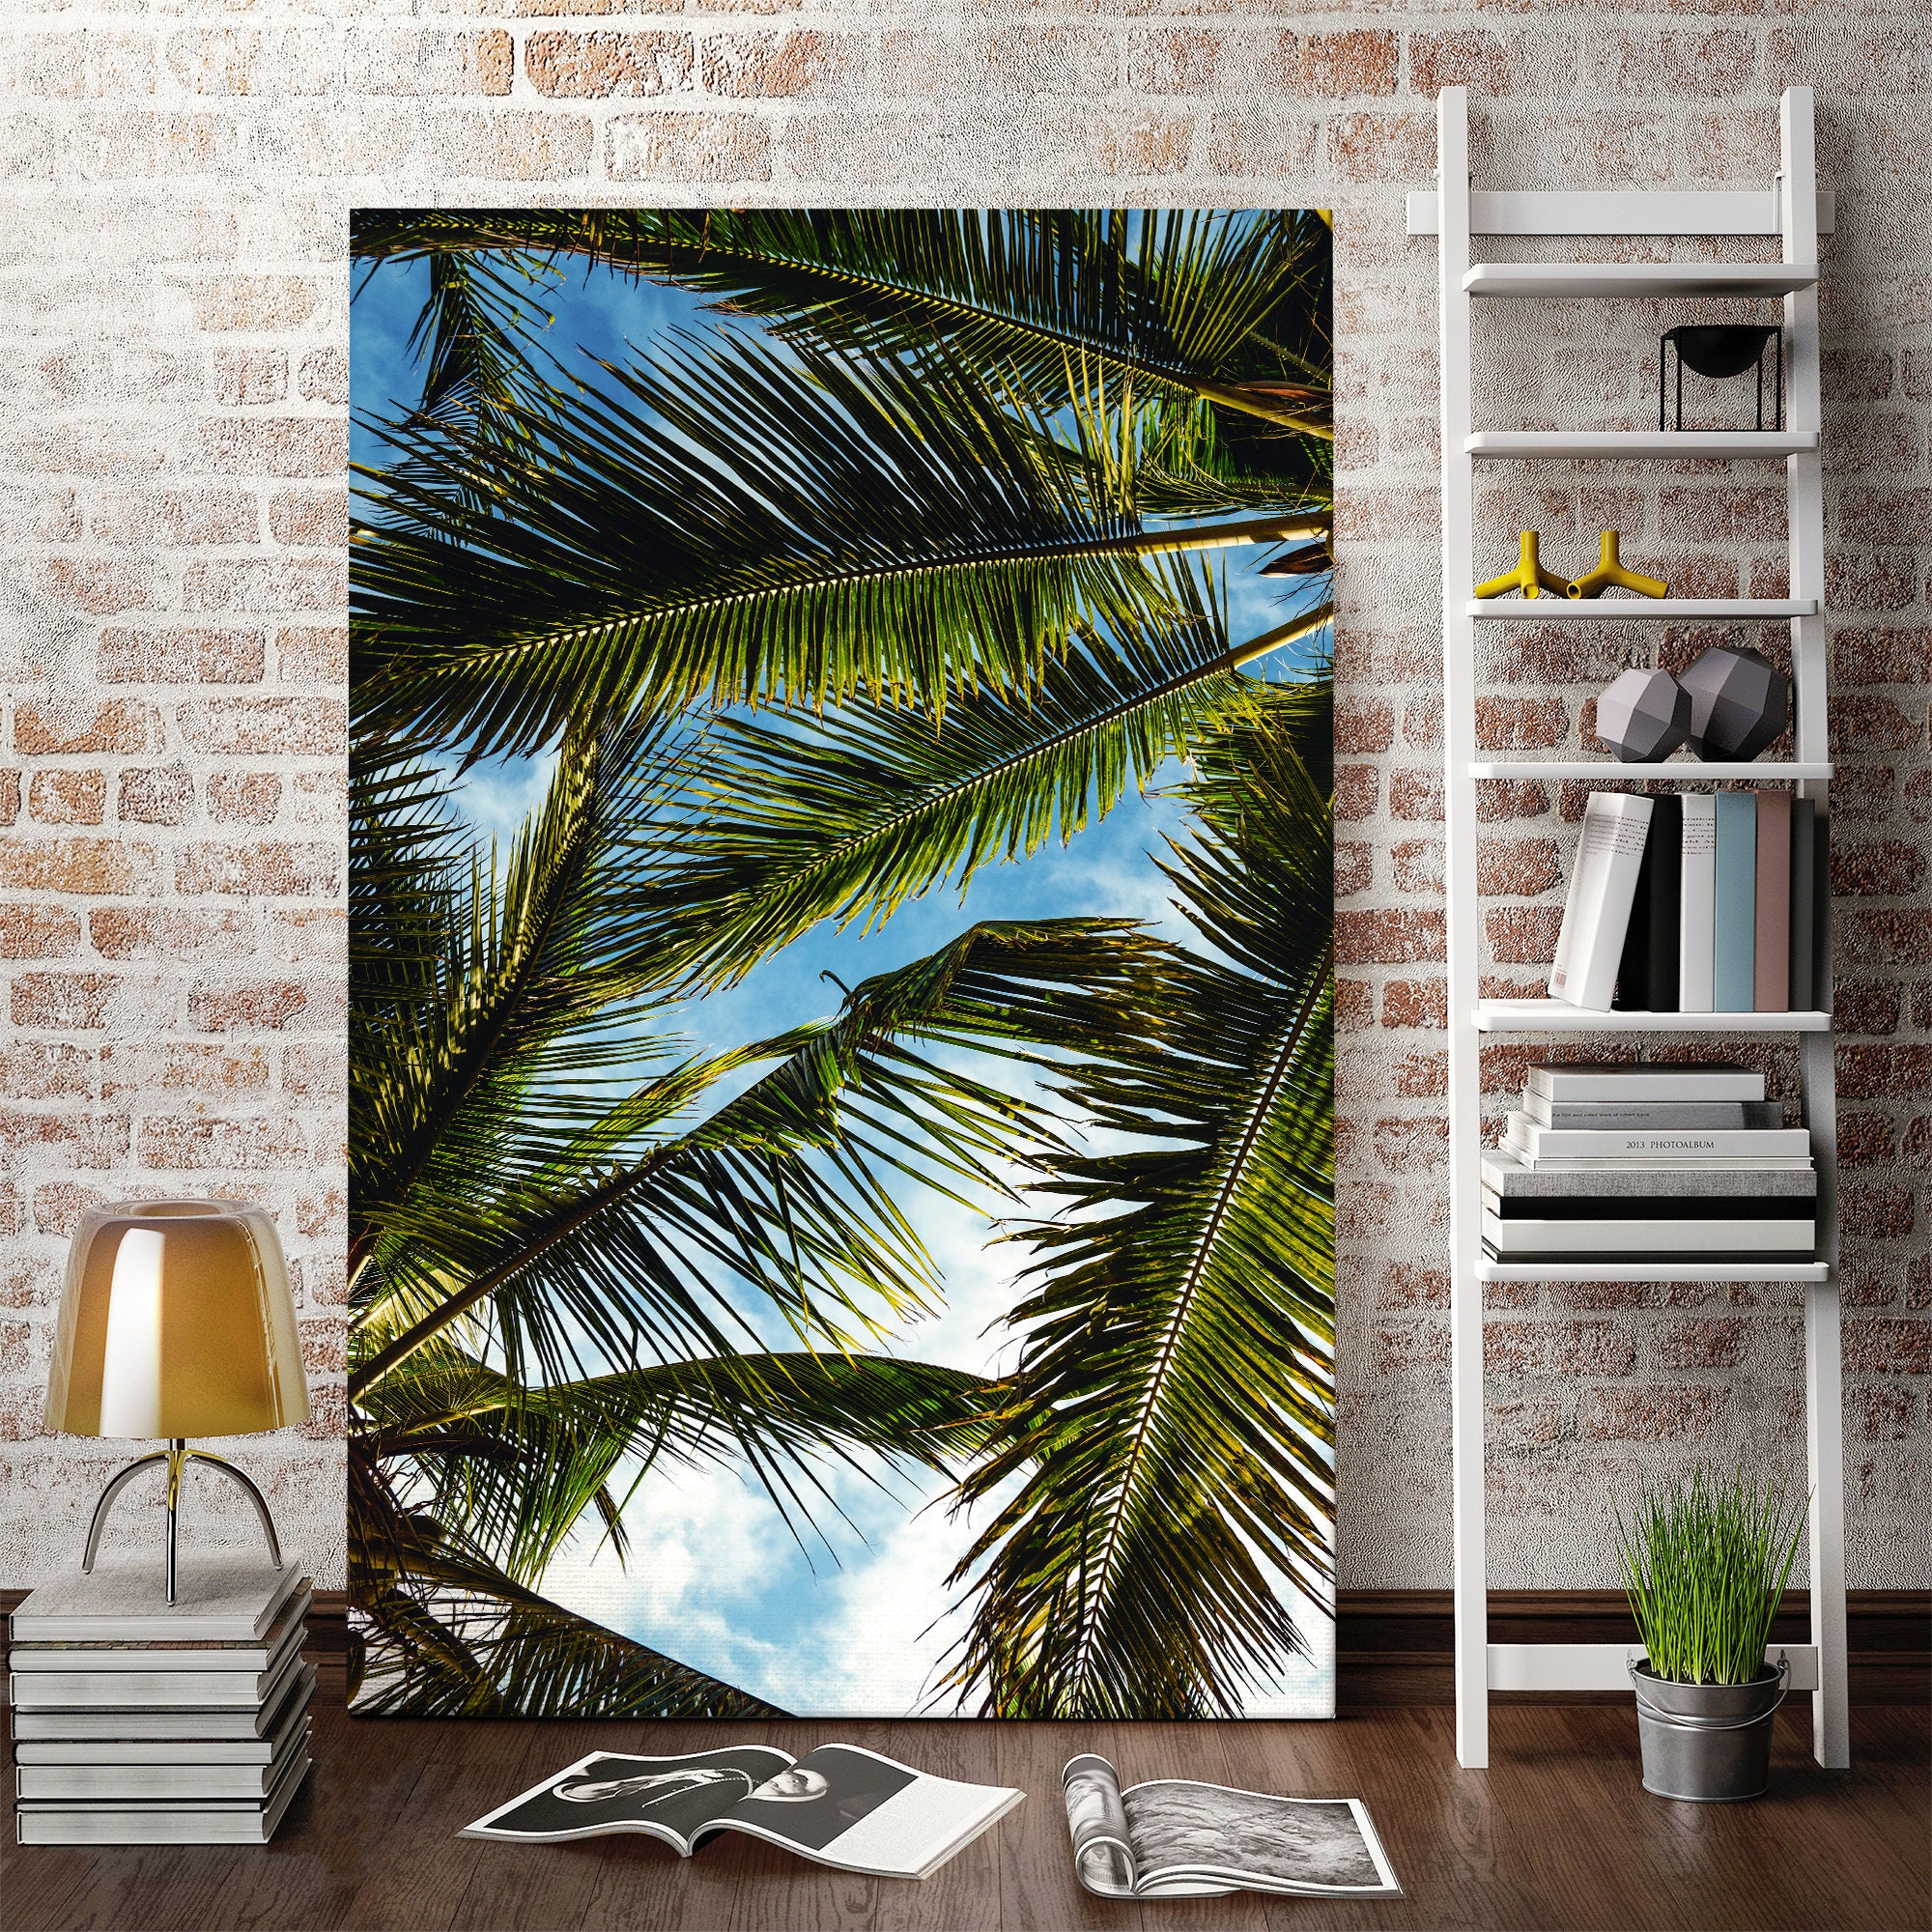 Coconut Tree Leaves Under Blue Sky Modern Wall Decorations | Etsy